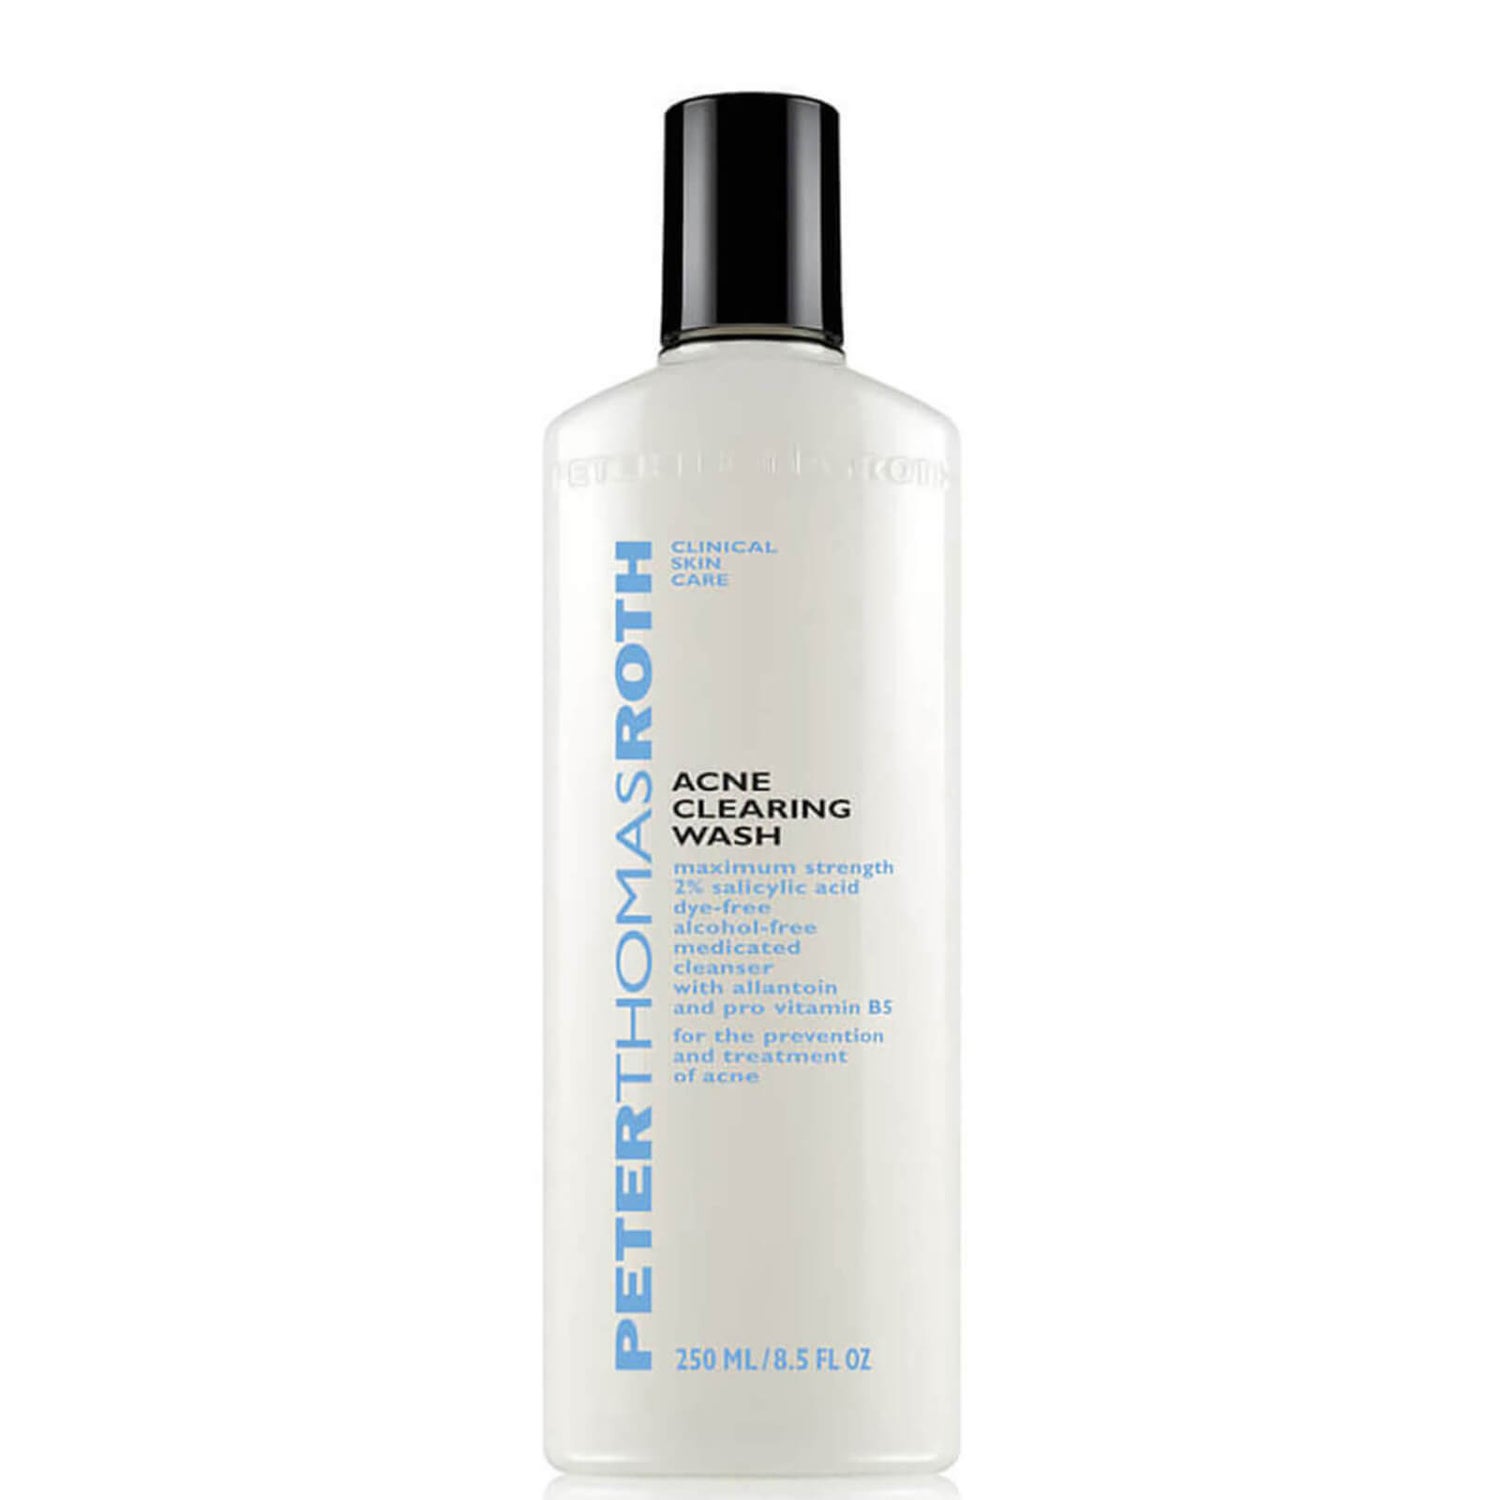 Peter Thomas Roth Acne Clearing Wash (8.5 fl. oz.)